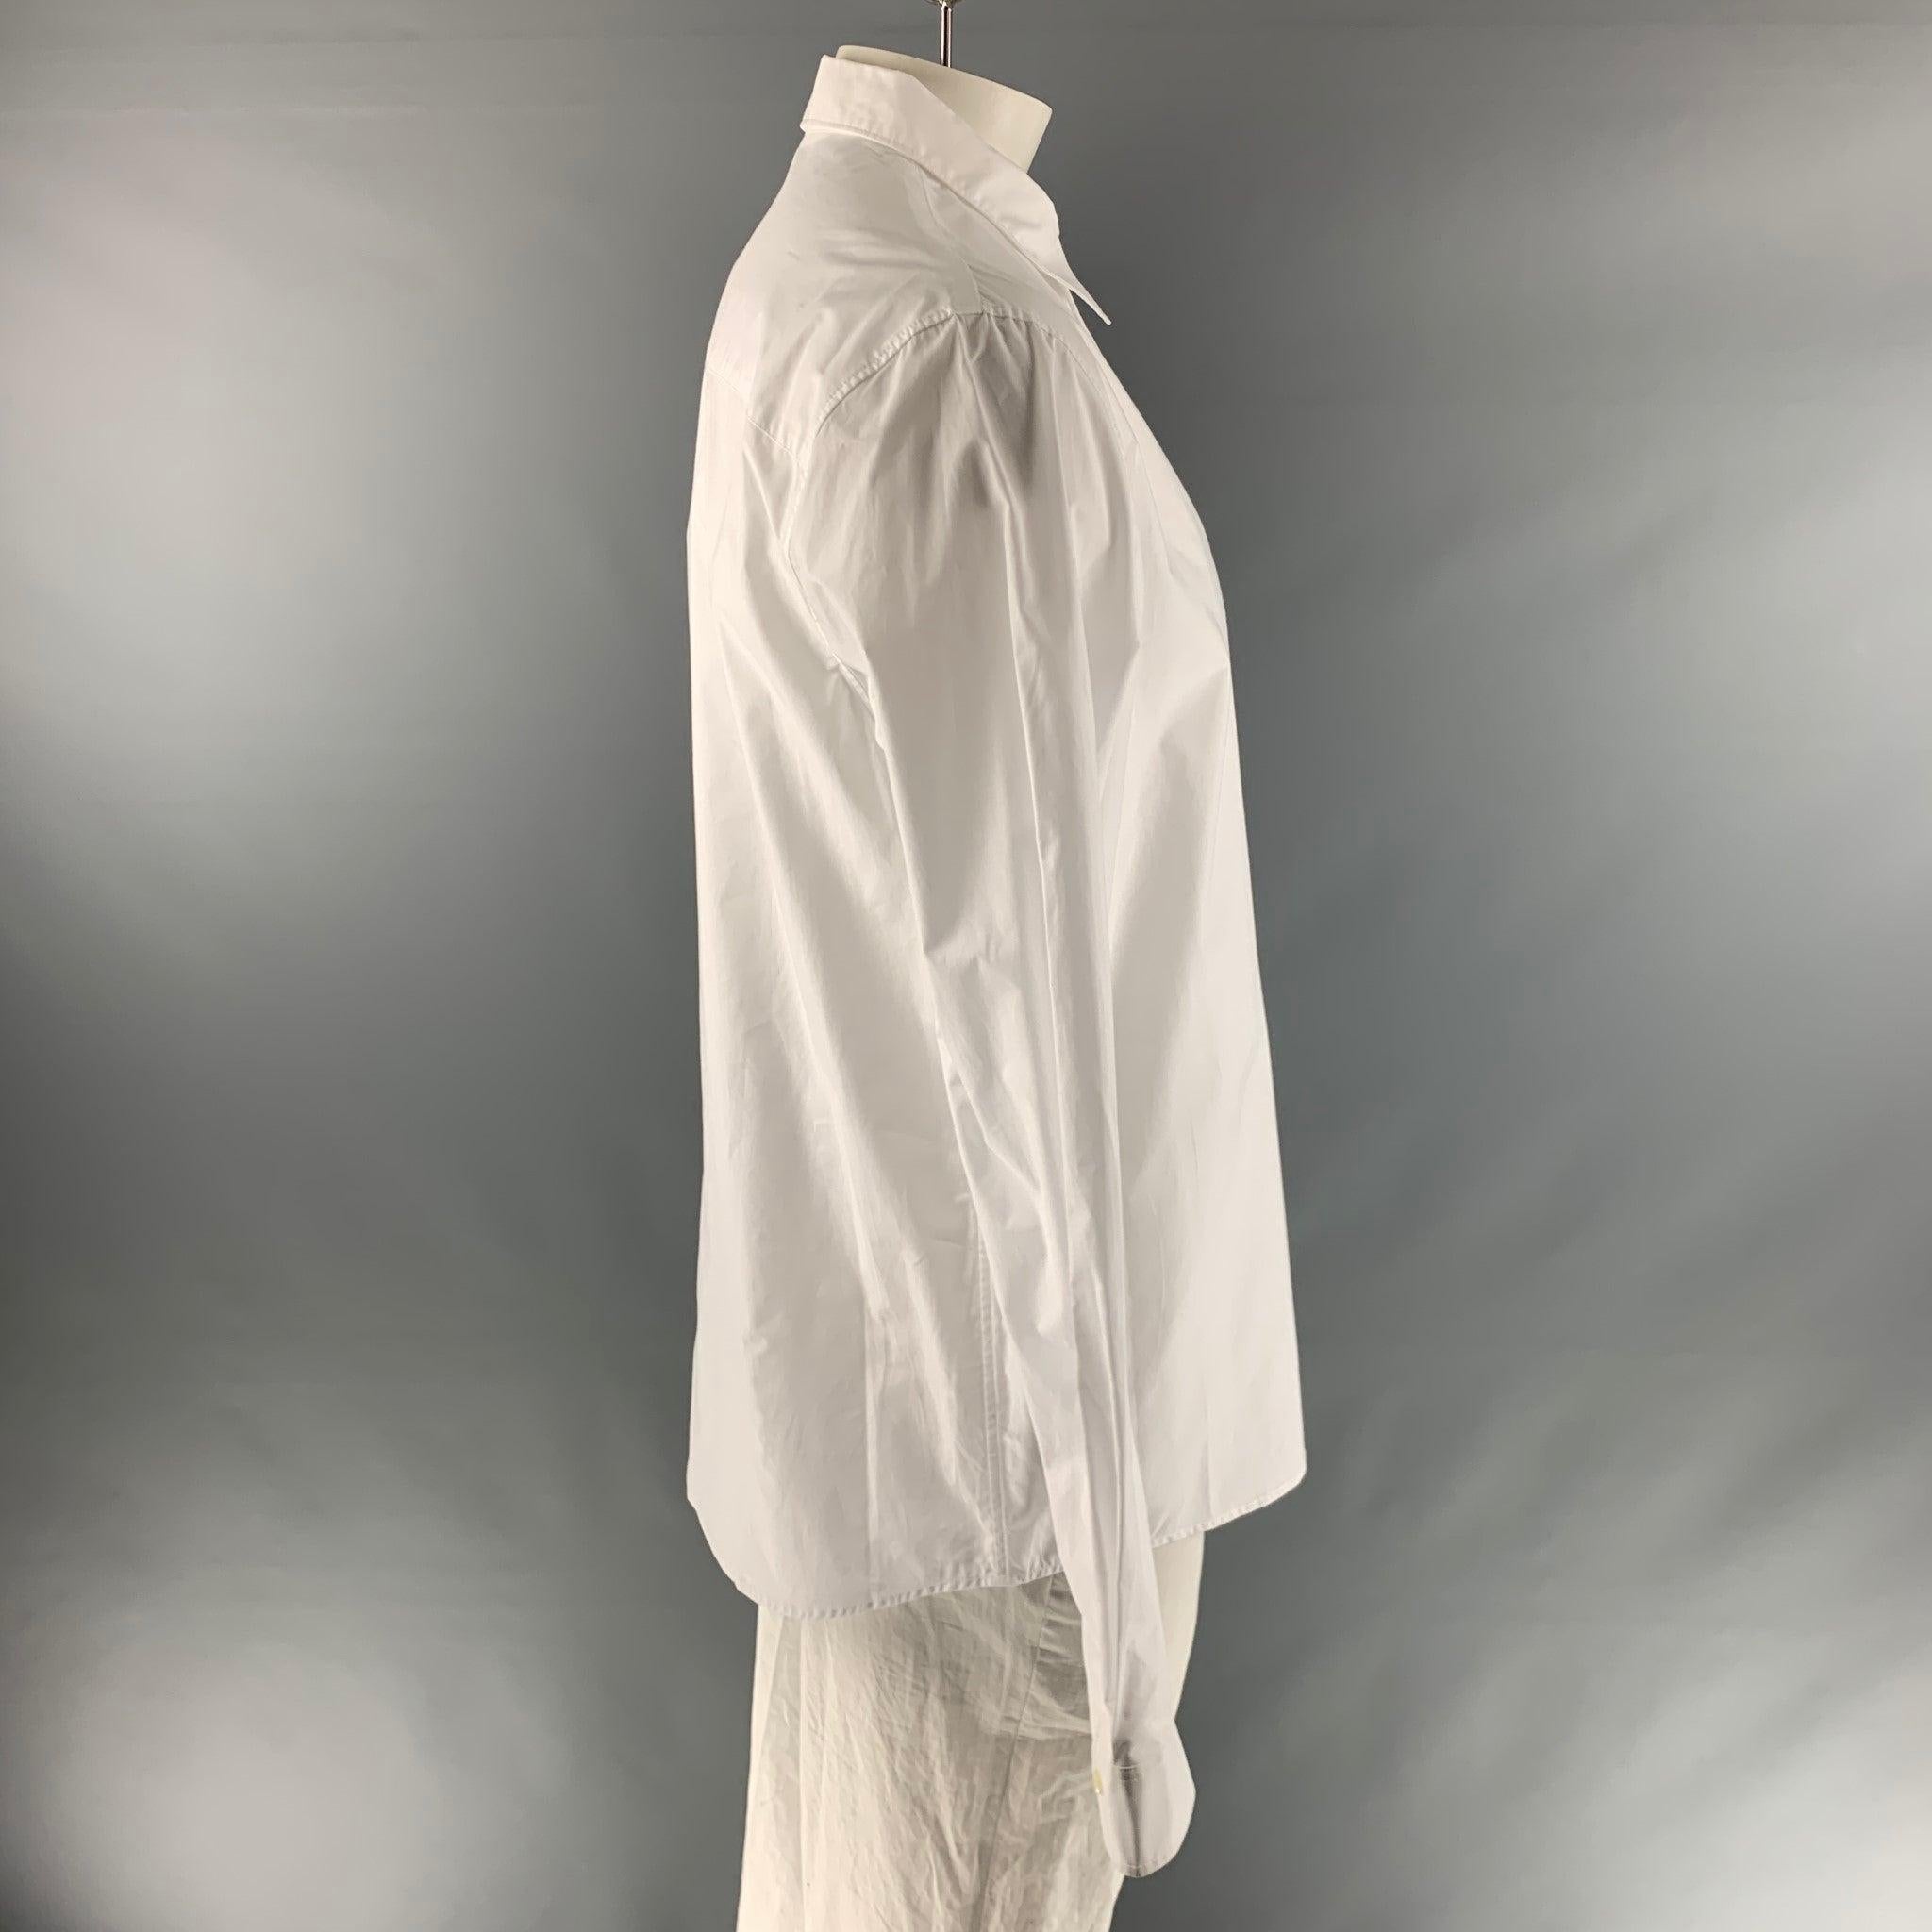 A.P.C. long sleeve shirt comes in a white cotton , featuring a classic fit, straight collar, and a button up closure.Very Good Pre-Owned Condition. 

Marked:   XXL 

Measurements: 
 
Shoulder: 19 inches Chest: 46 inches Sleeve: 27 inches Length: 33